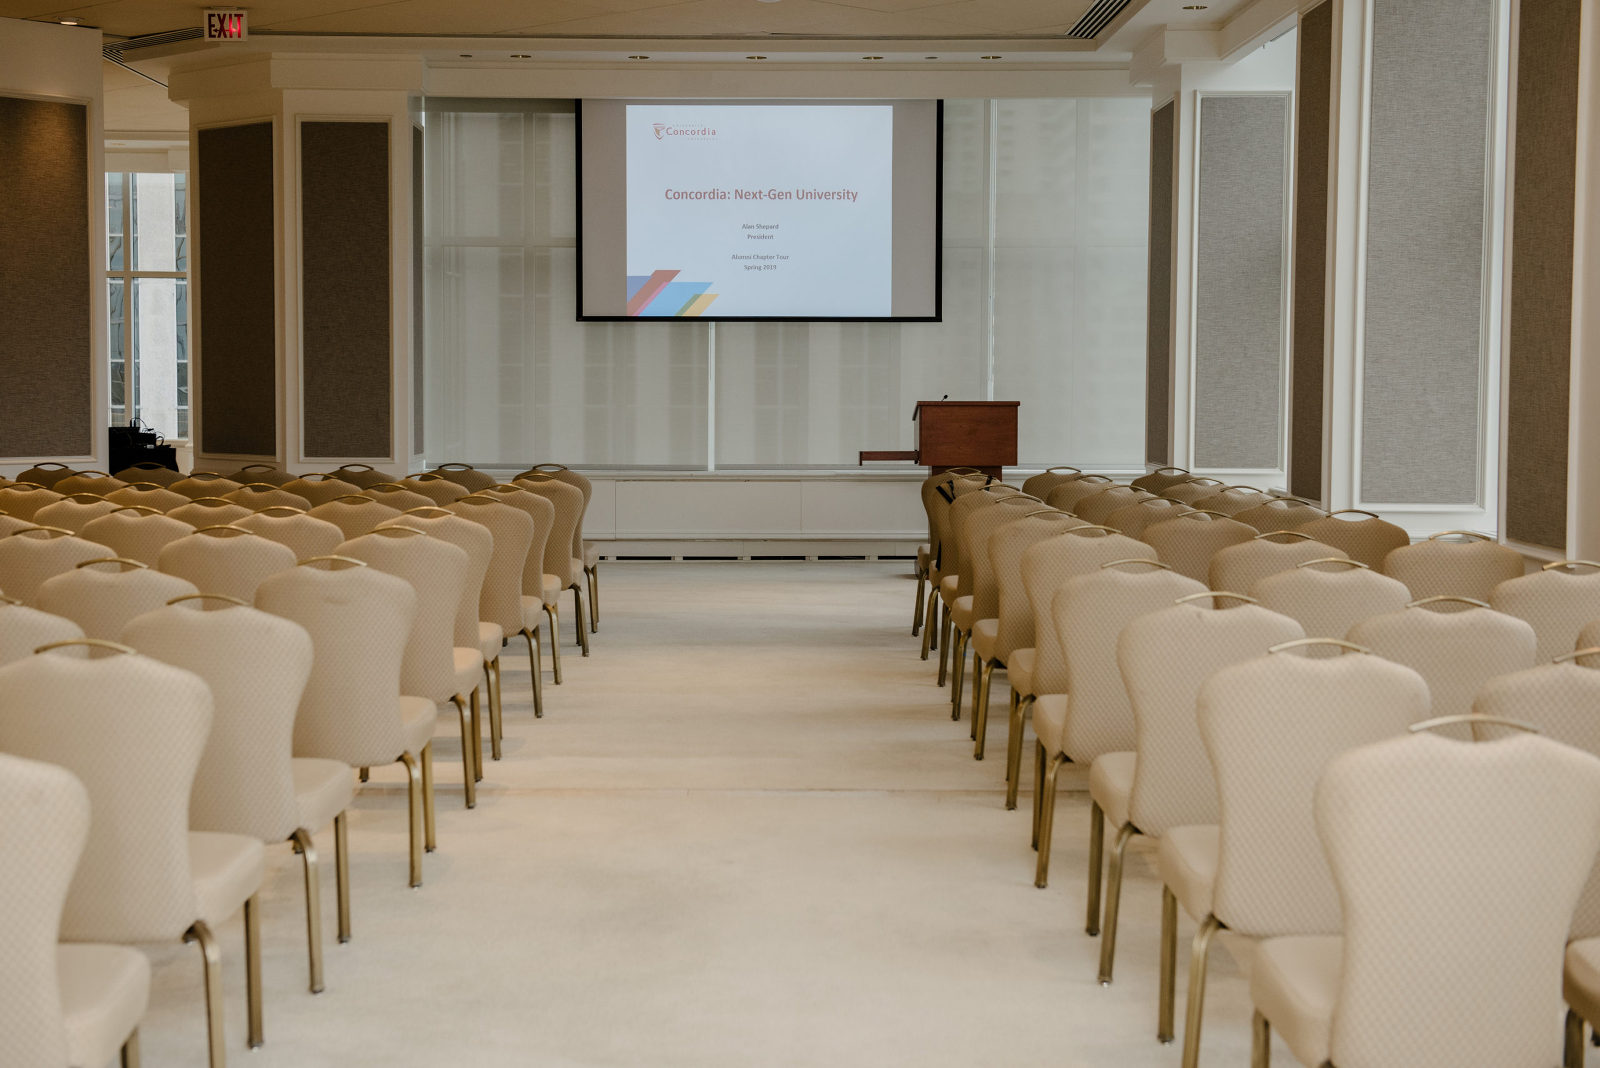 The presentation setup with rows of chairs and a projector with powerpoint presenation